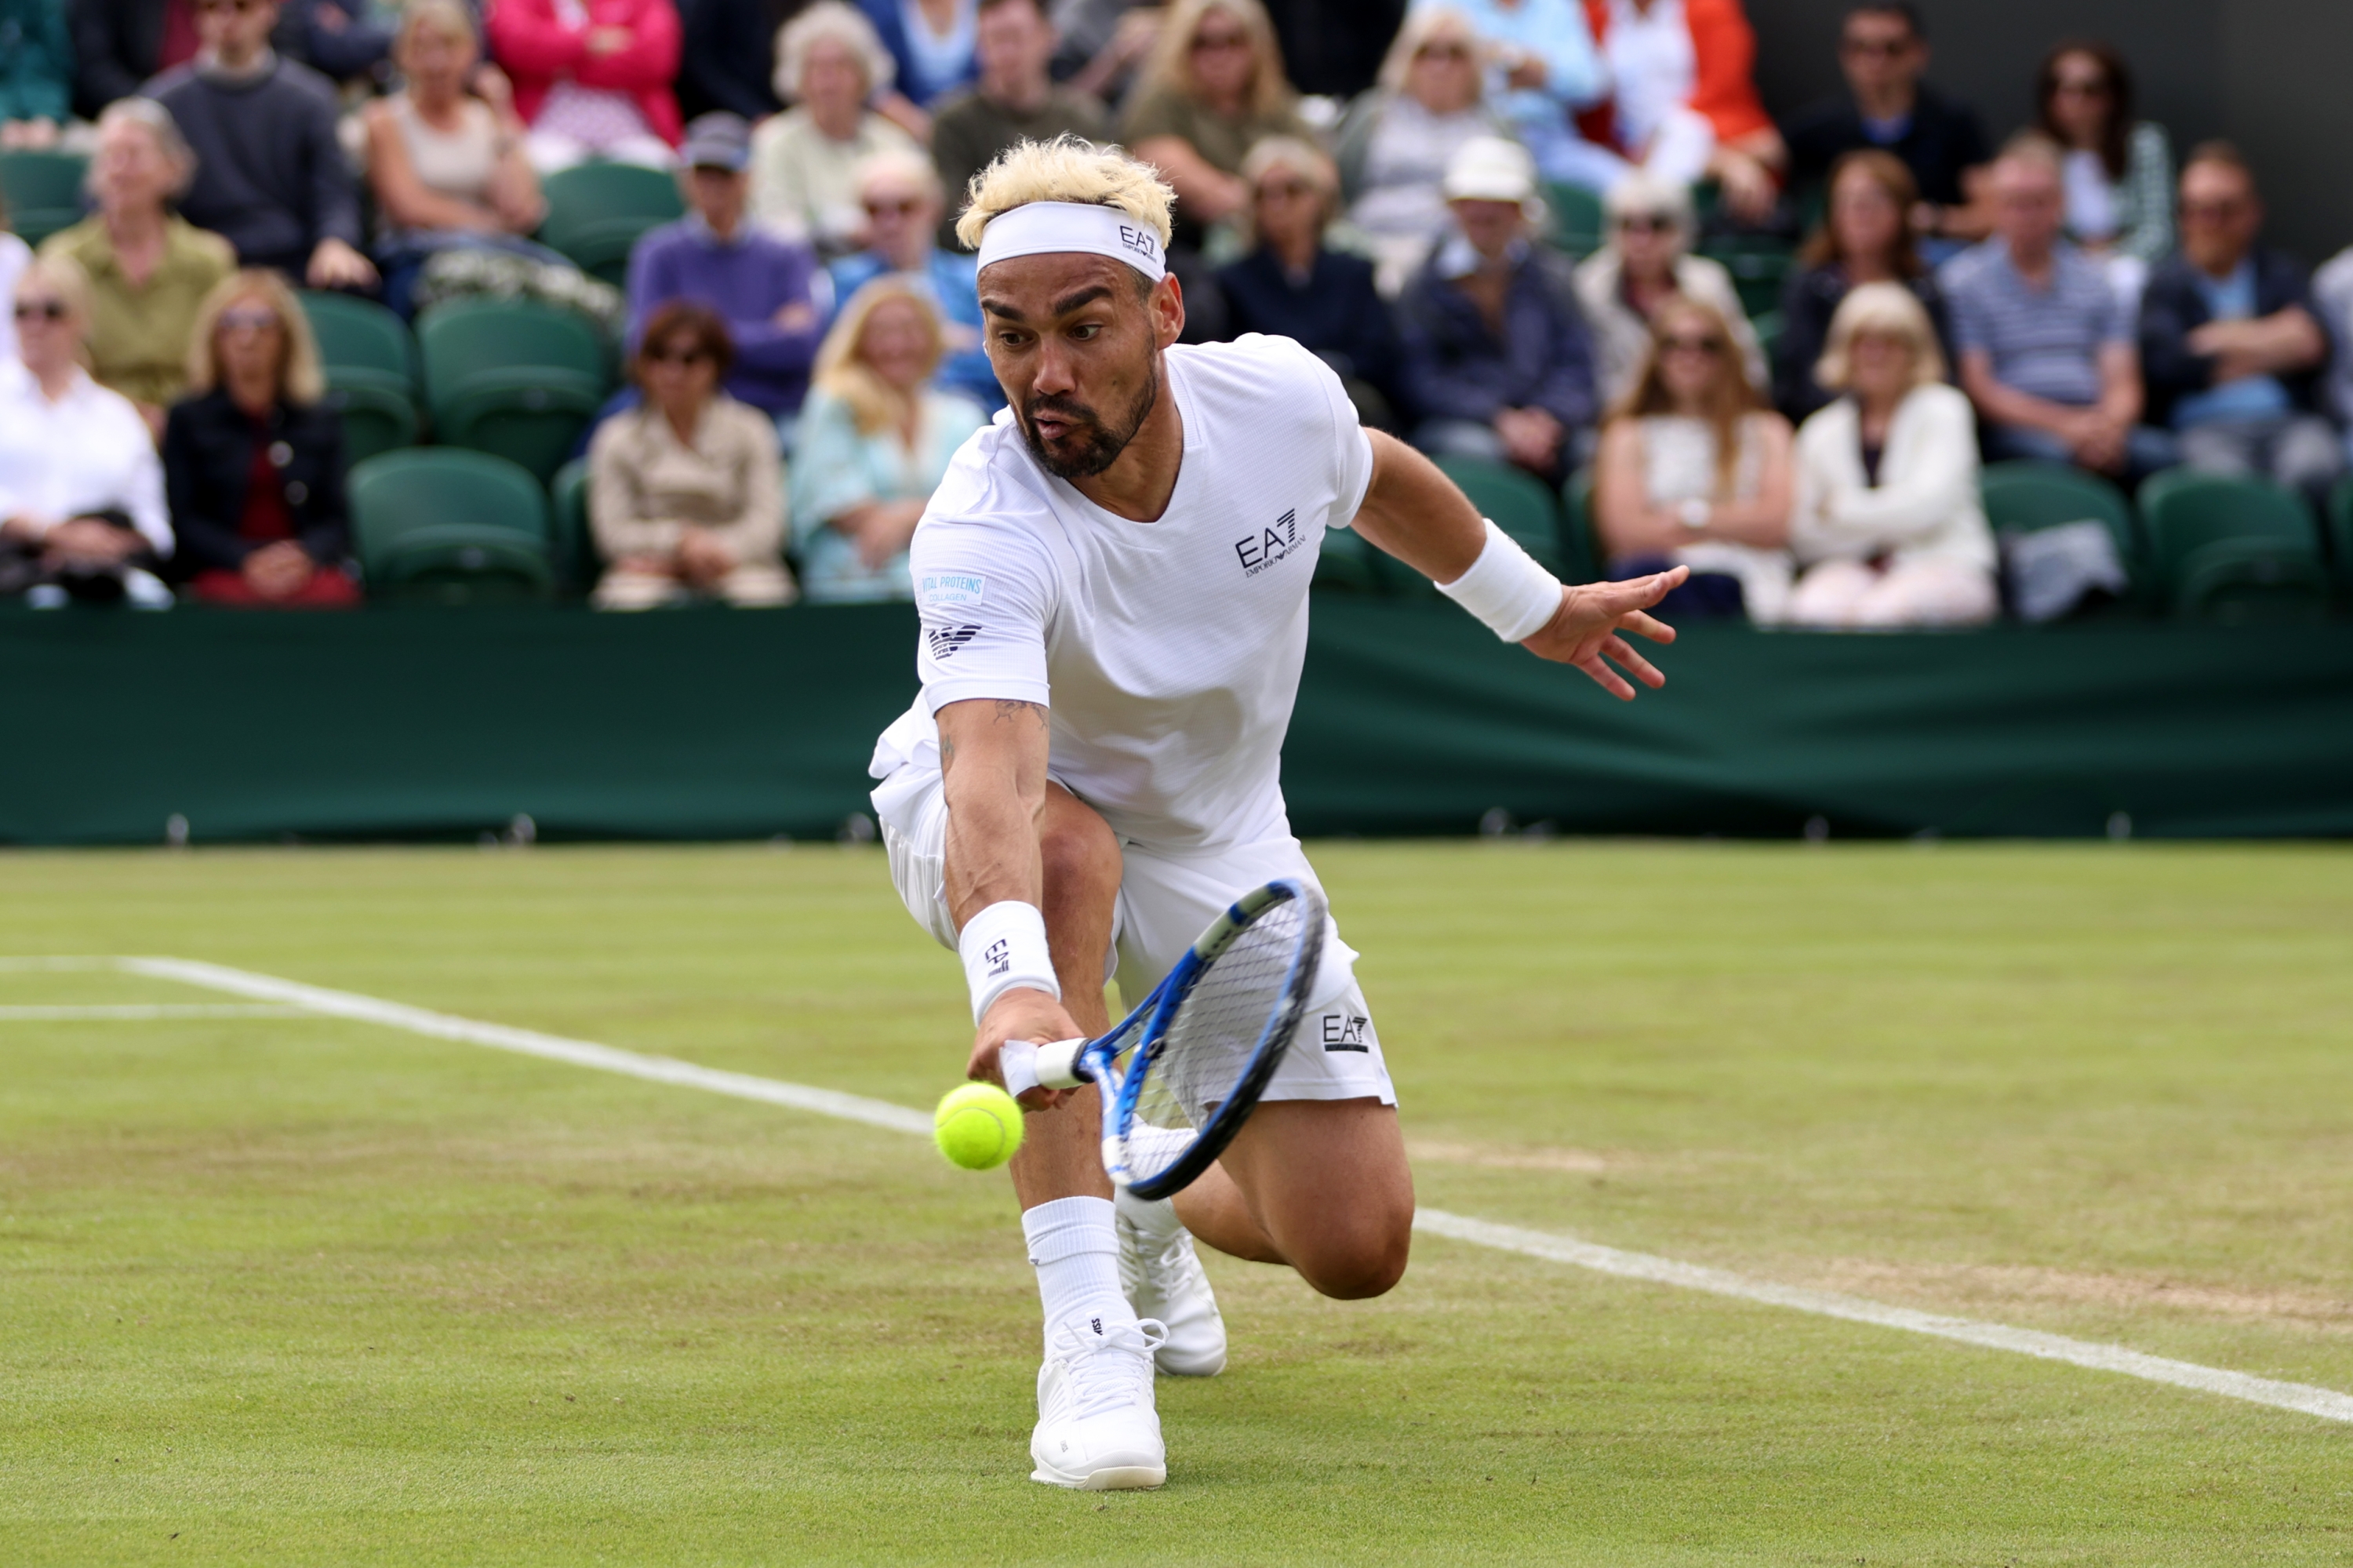 LONDON, ENGLAND - JULY 03: Fabio Fognini of Italy plays a backhand against Casper Ruud of Norway in his Men's Singles second round match during day three of The Championships Wimbledon 2024 at All England Lawn Tennis and Croquet Club on July 03, 2024 in London, England. (Photo by Clive Brunskill/Getty Images)